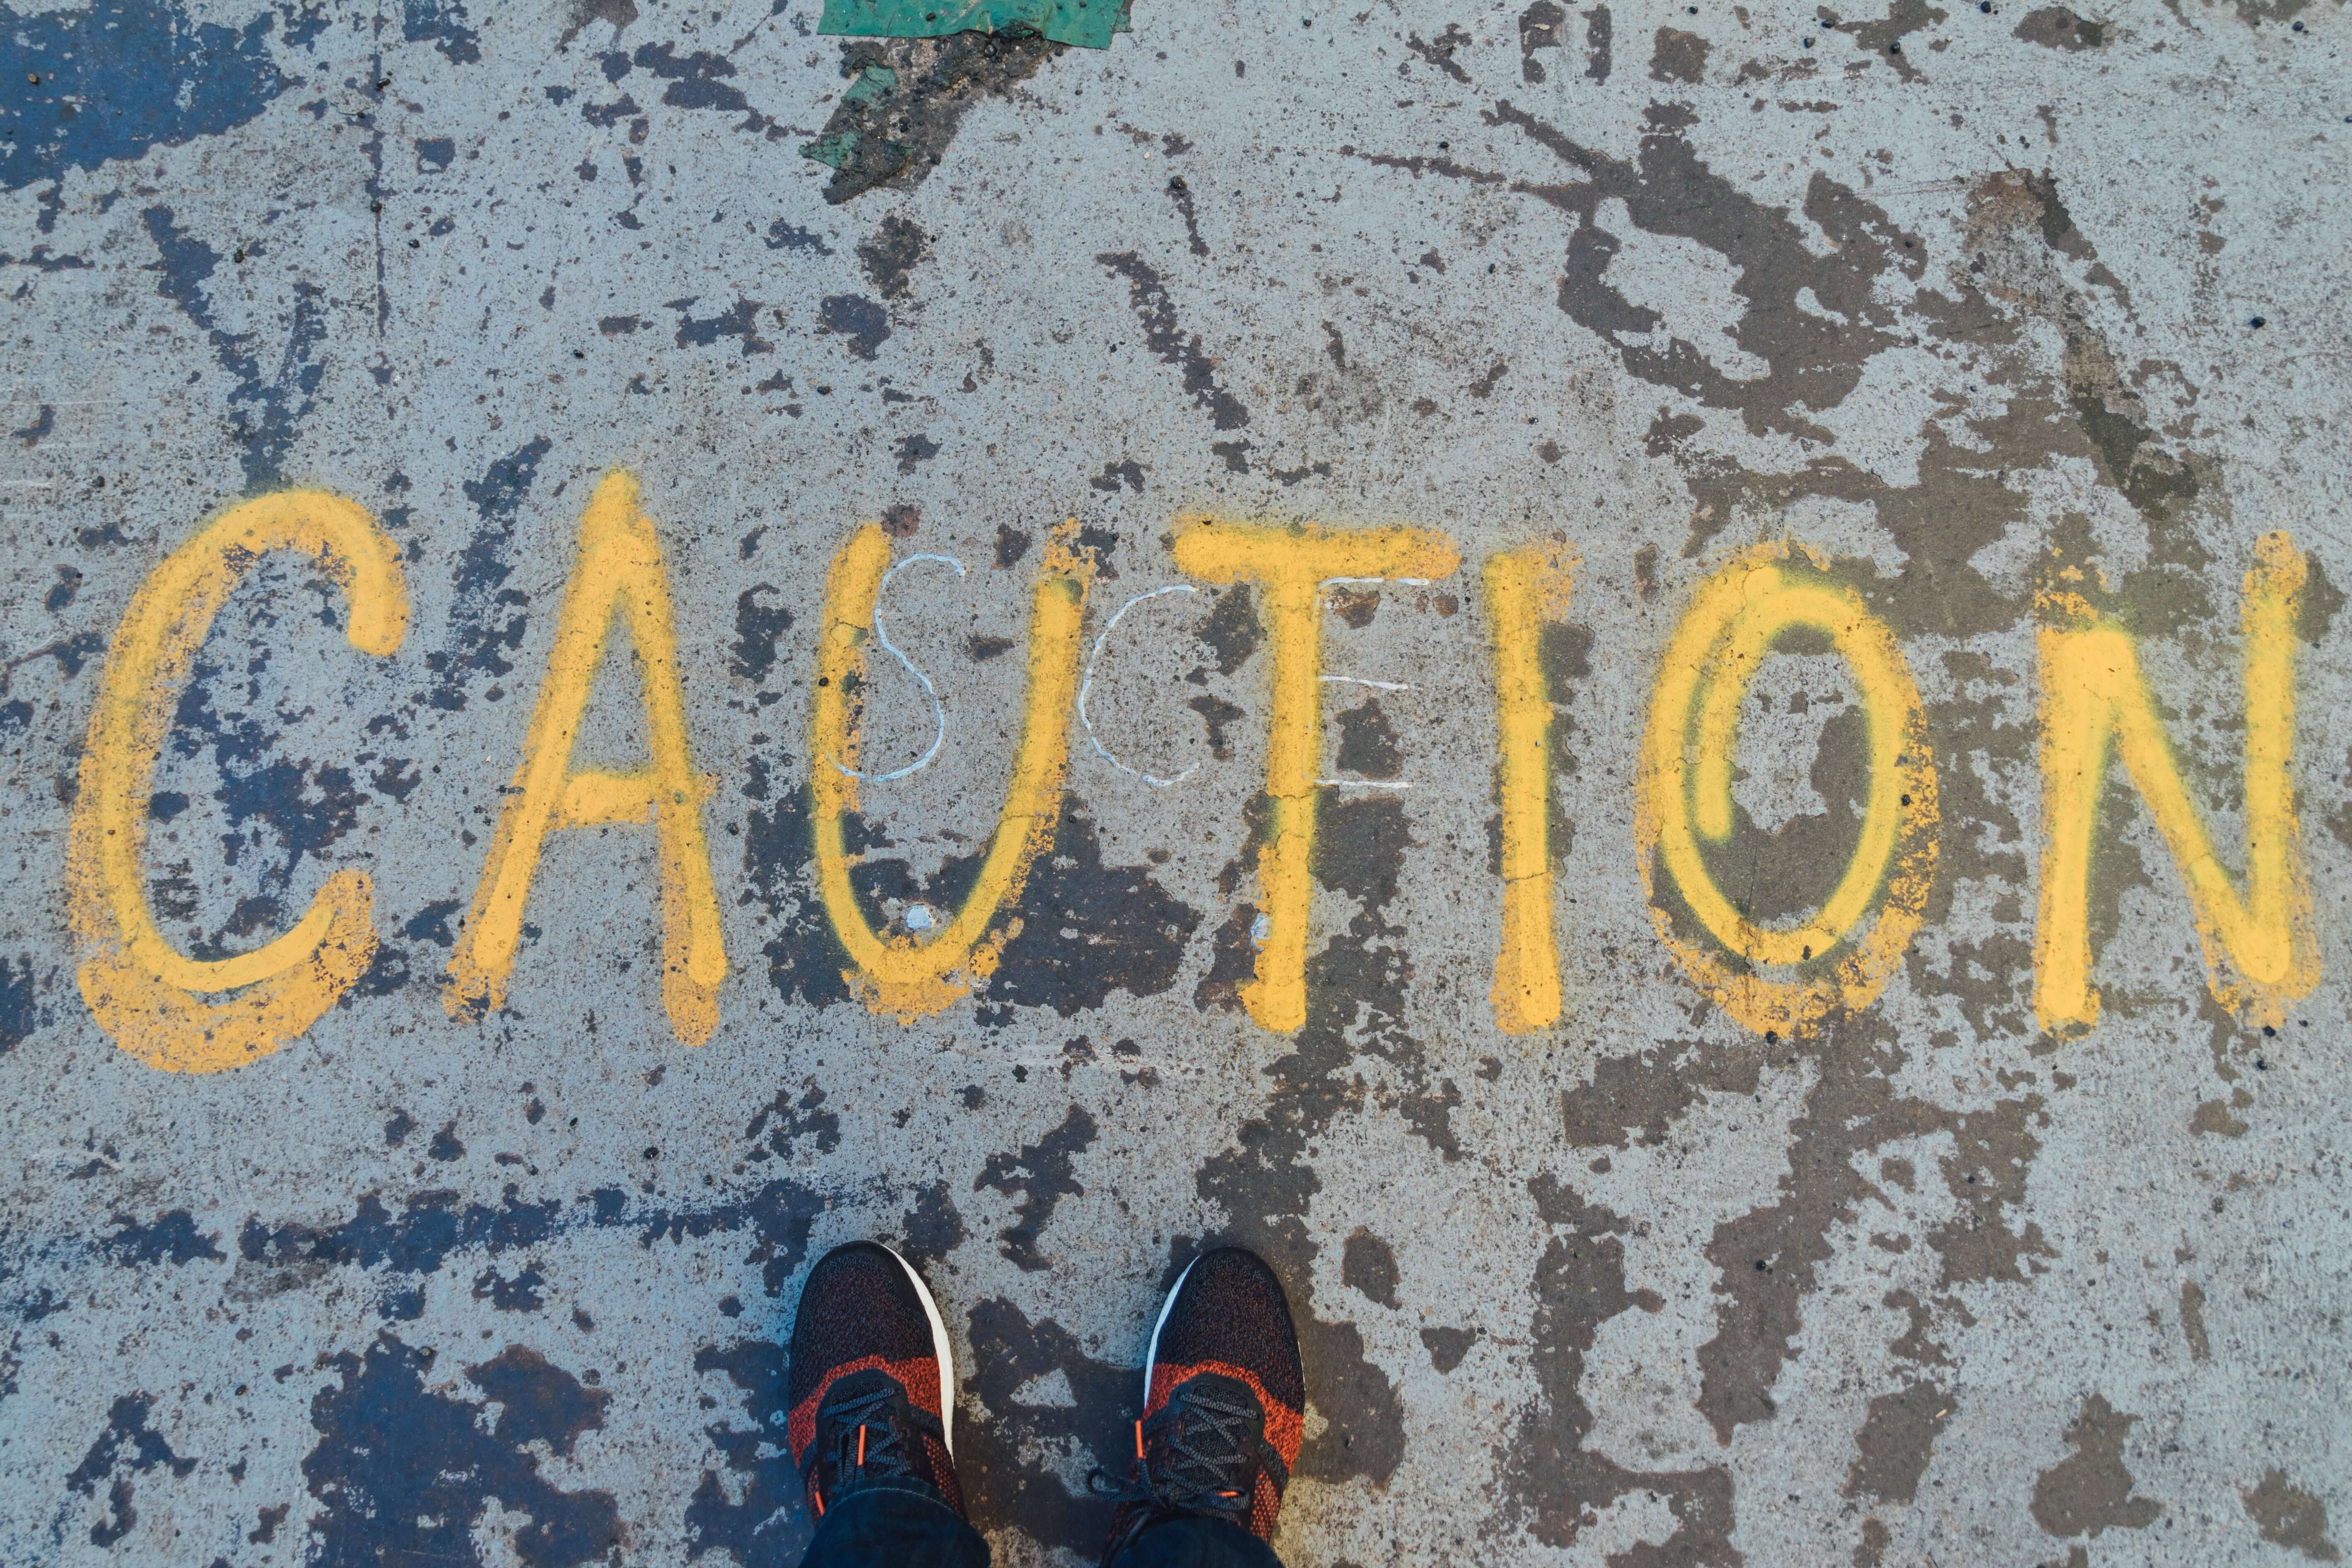 The word "caution" is painted on a concrete floor